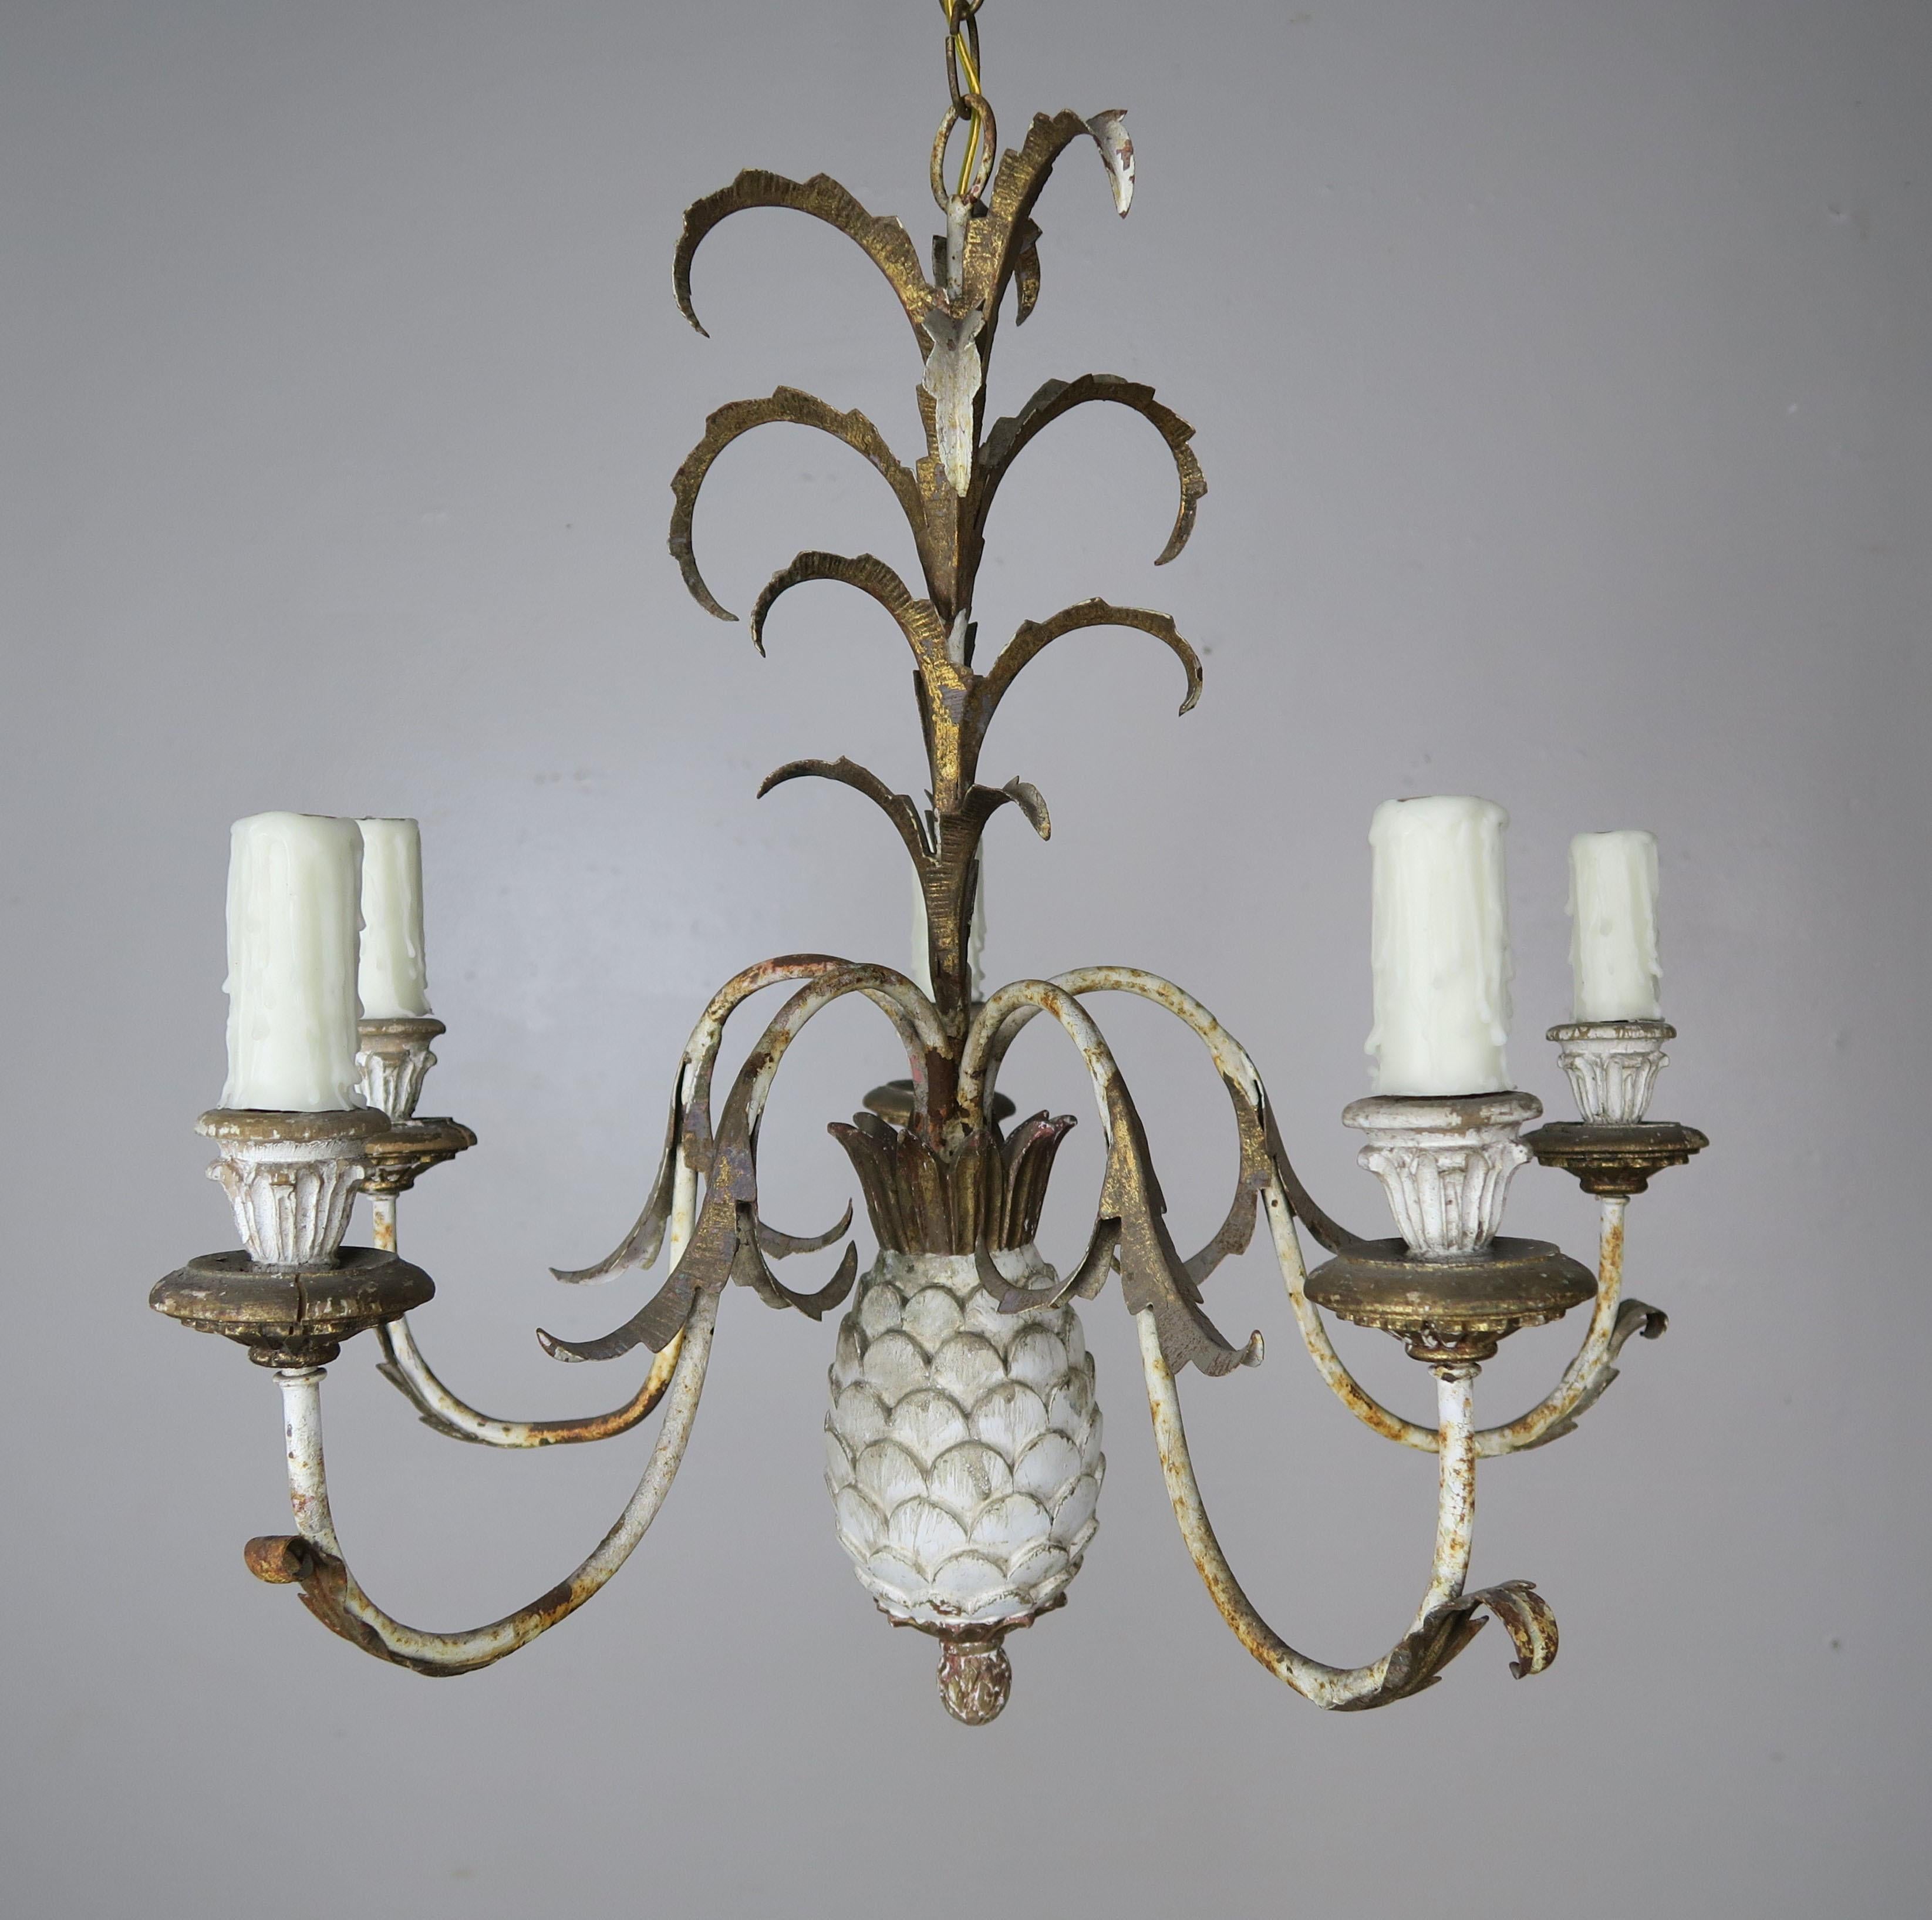 Italian painted wood & metal pineapple shaped four light chandelier. The fixture is newly rewired with drip wax candle covers. Includes chain & canopy.